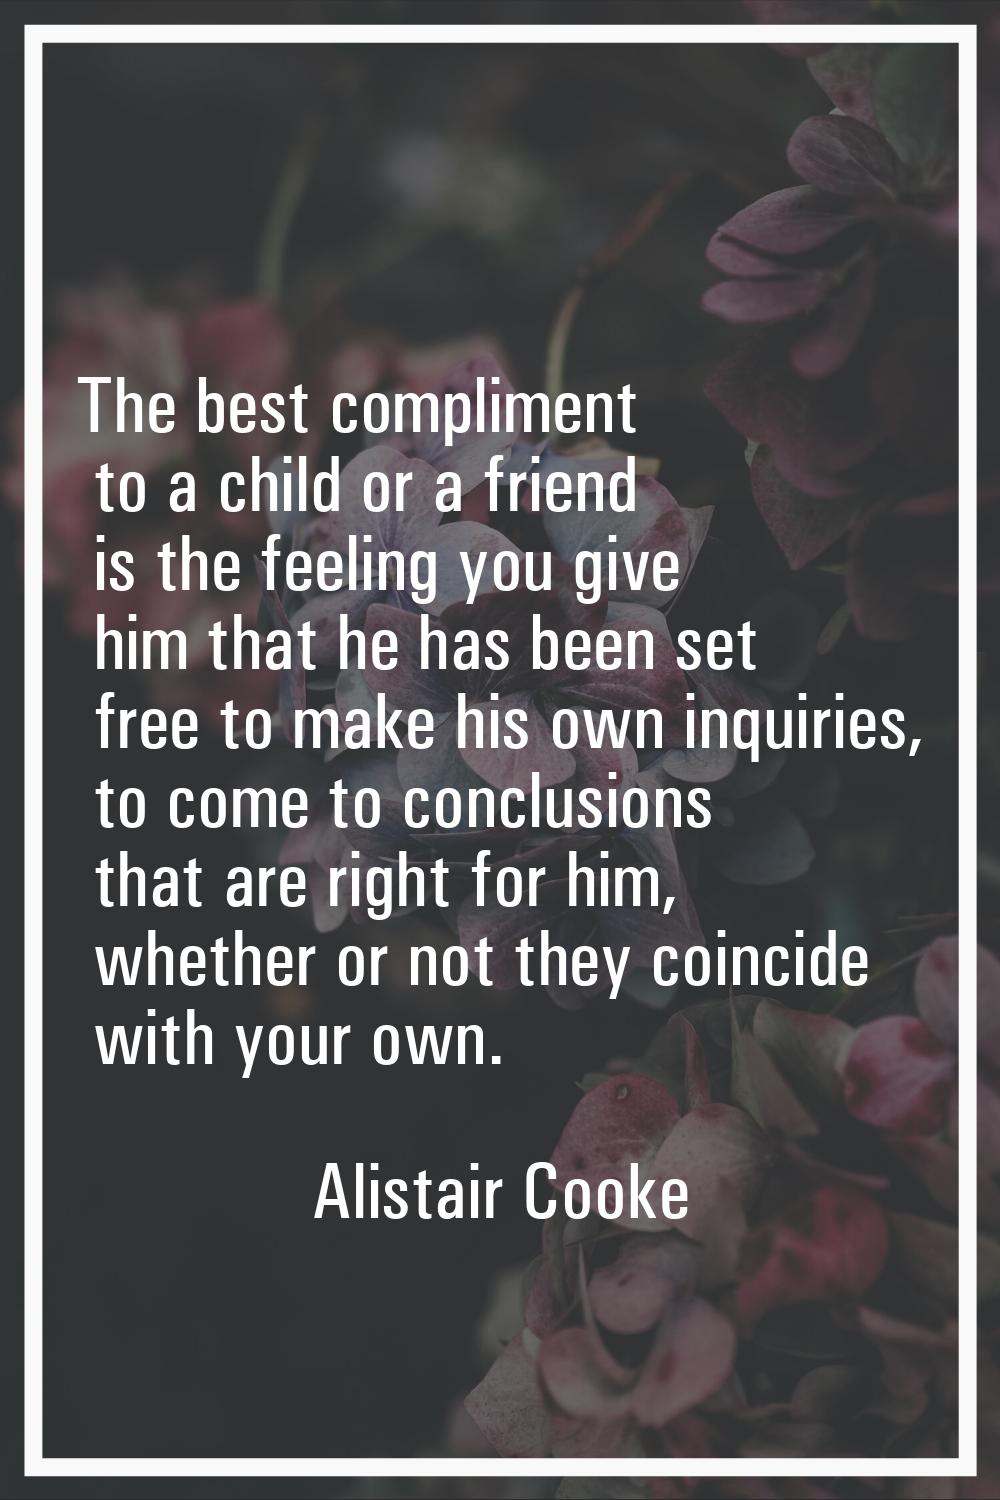 The best compliment to a child or a friend is the feeling you give him that he has been set free to